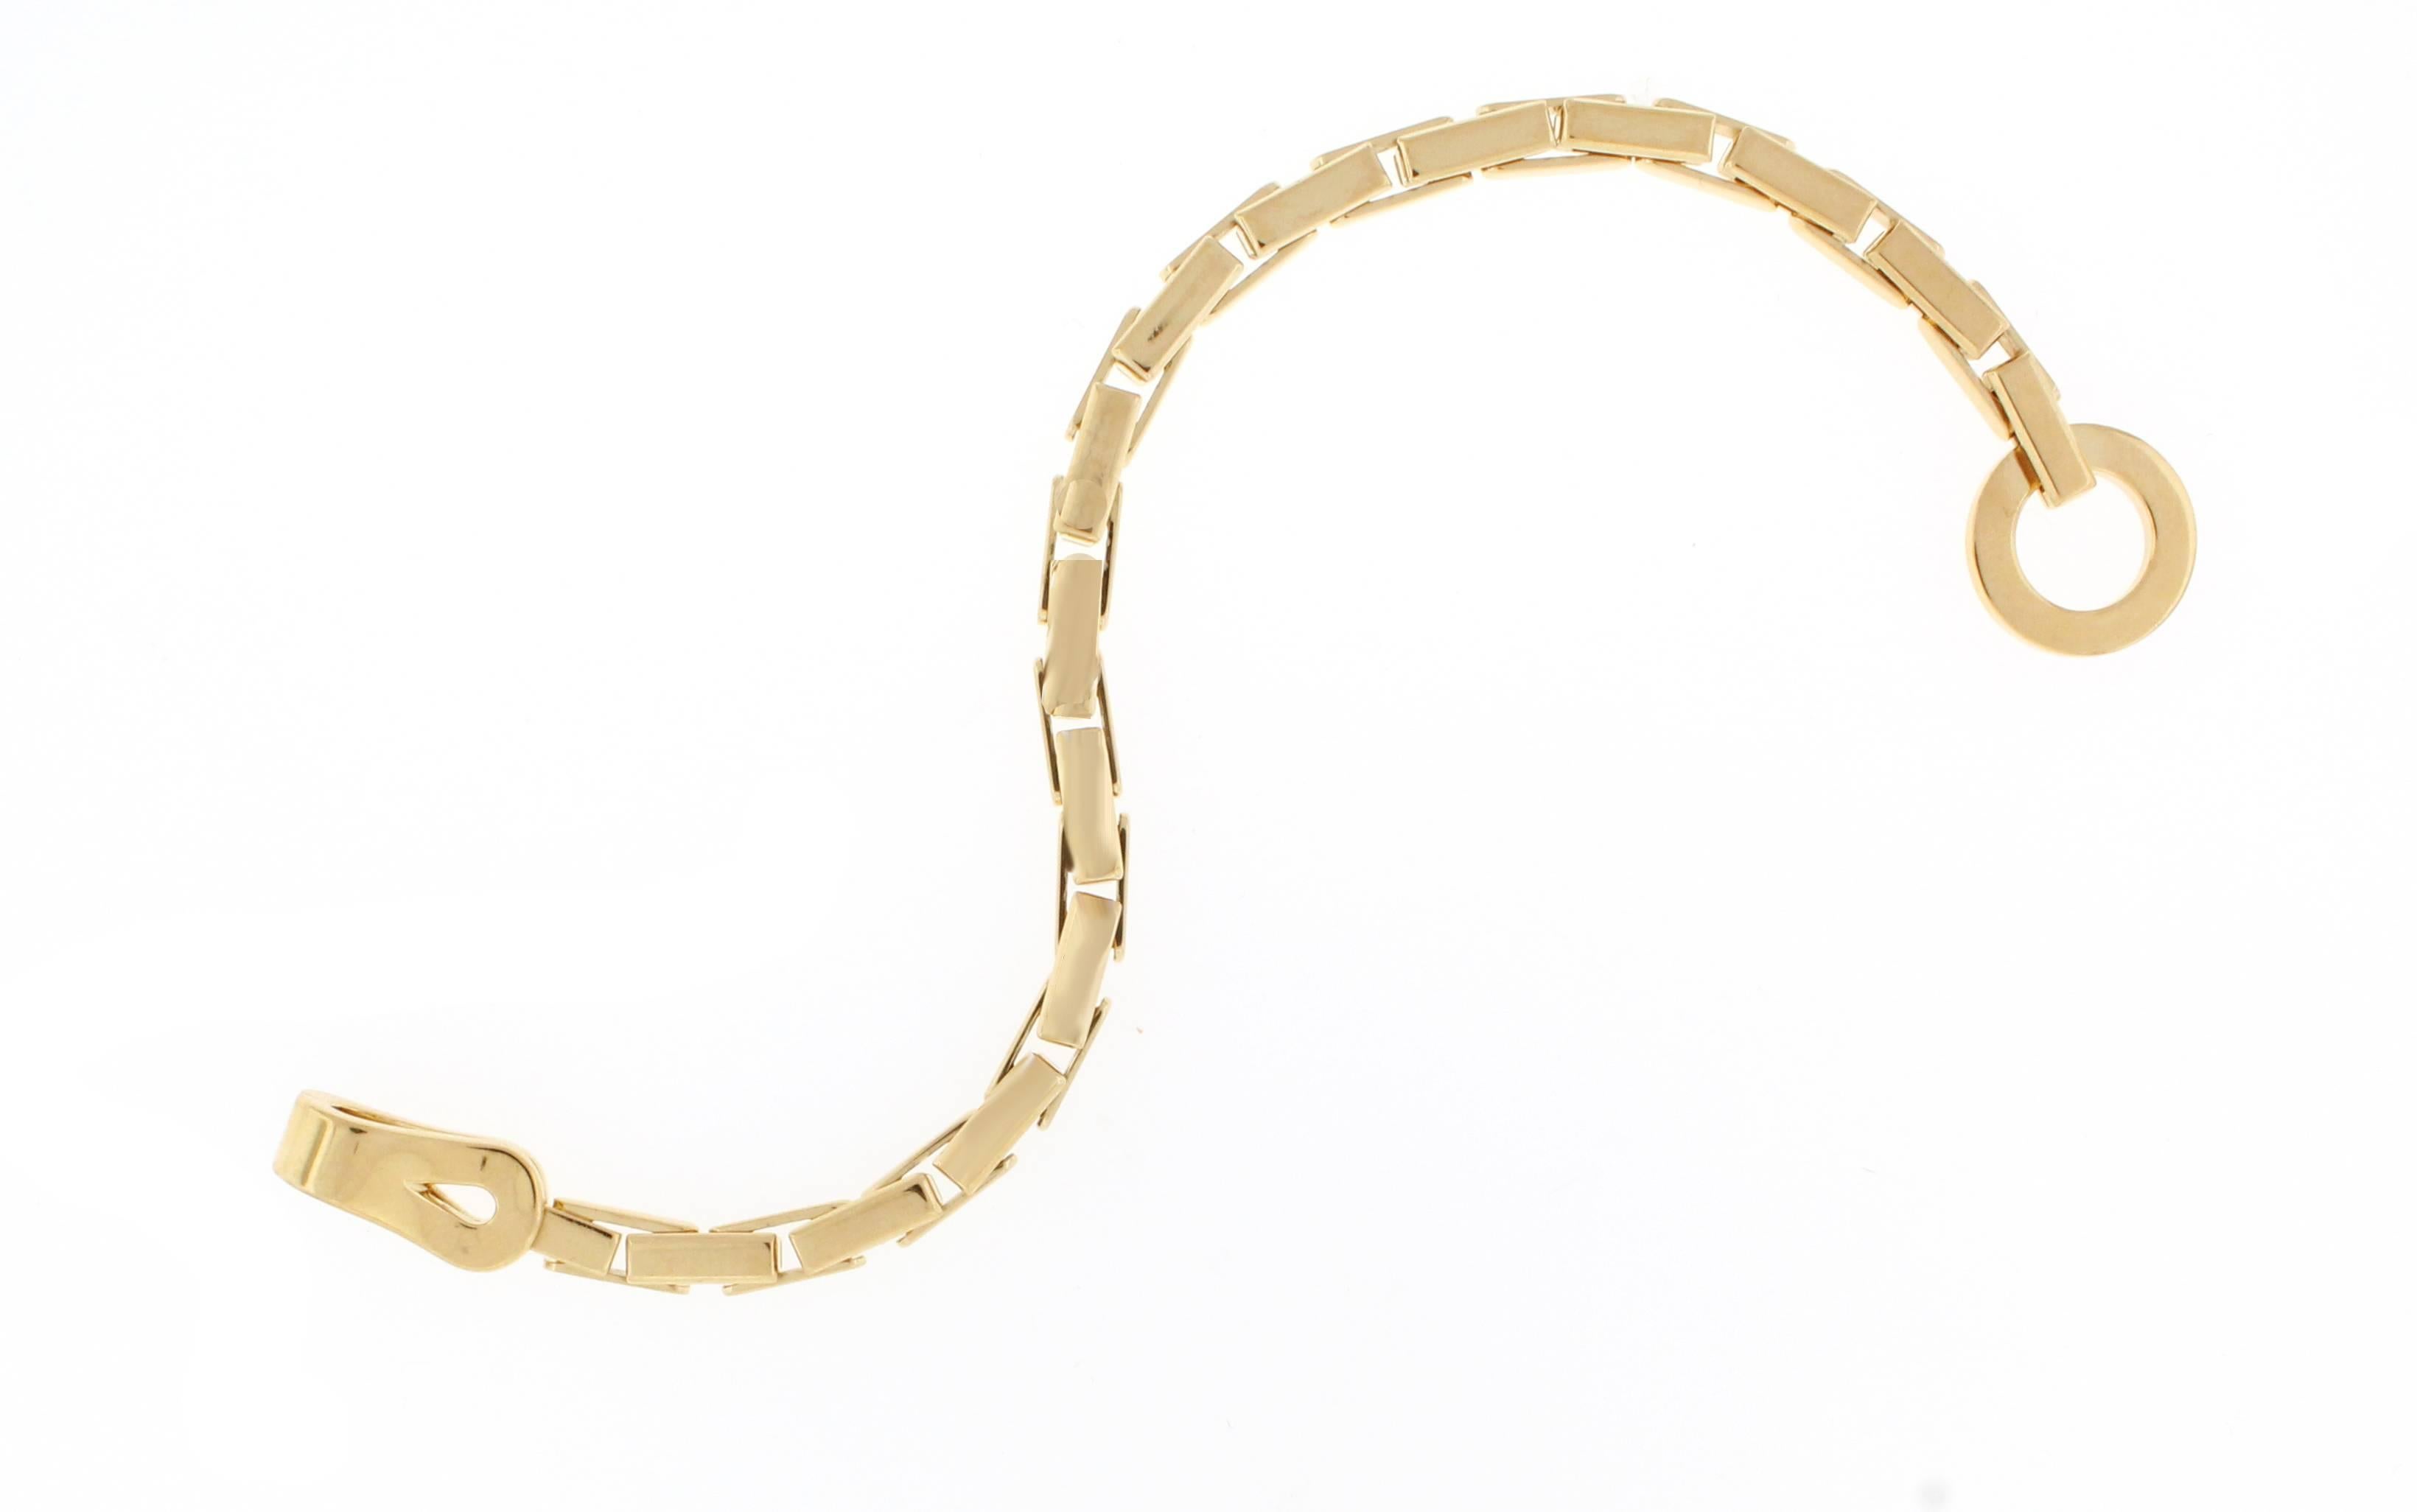 Cartier has borrowed the central motif of this jewelry collection from the world of fashion. Inspired by the clasps of the corsets this 18 karat gold bracelet is refined and sophisticated. 7 1/4 inches

